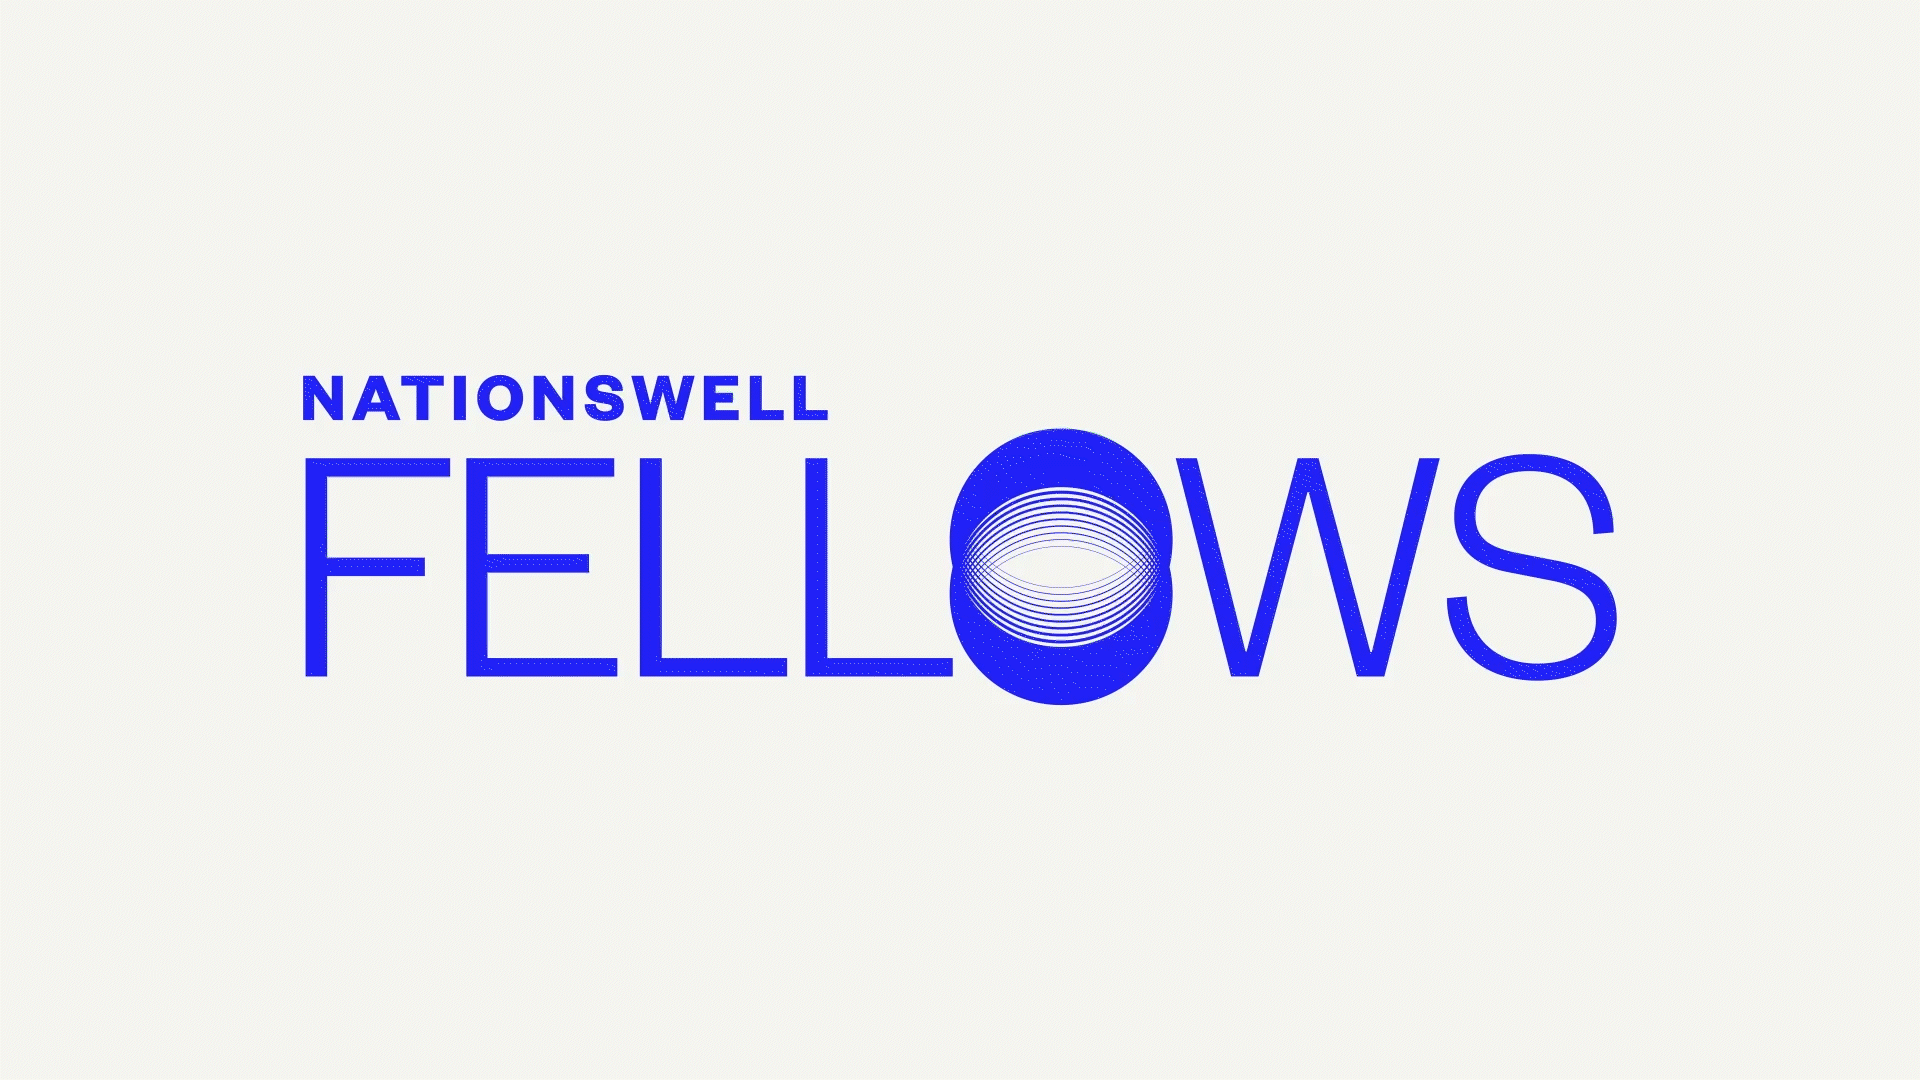 NationSwell Fellows